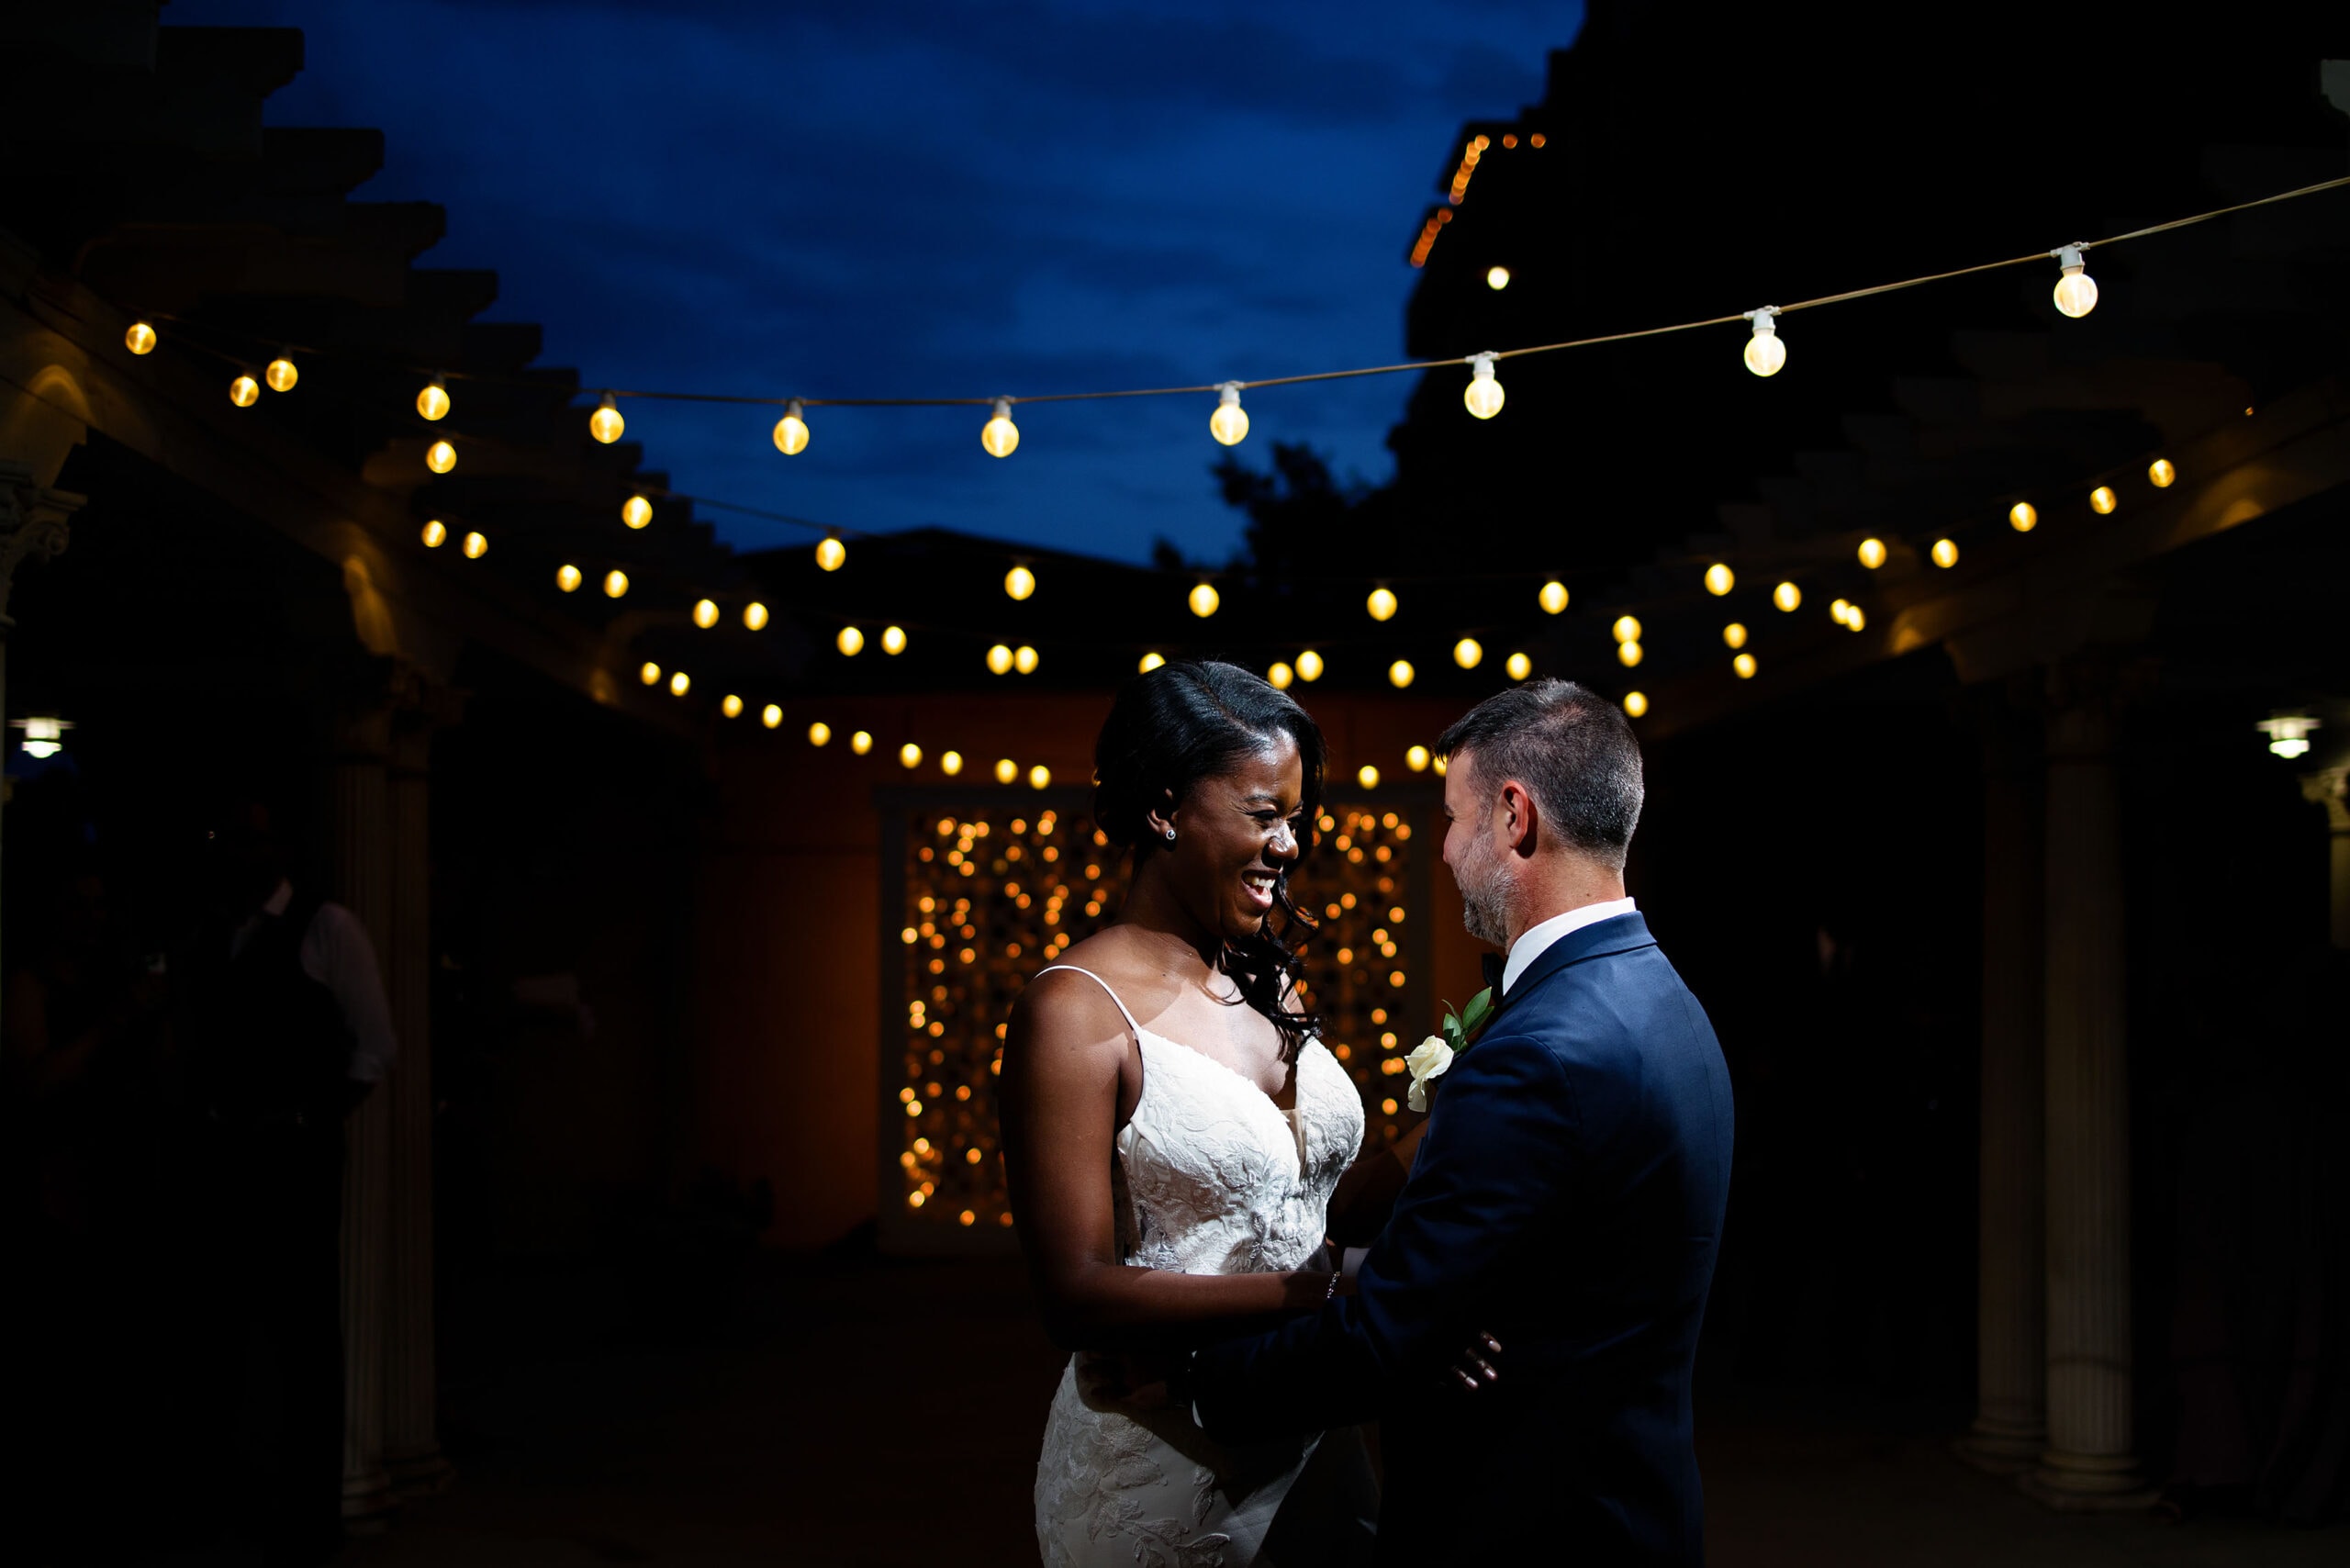 Aisha and Shad share their first dance under the market lights on the patio at Grant Humphrey’s Mansion